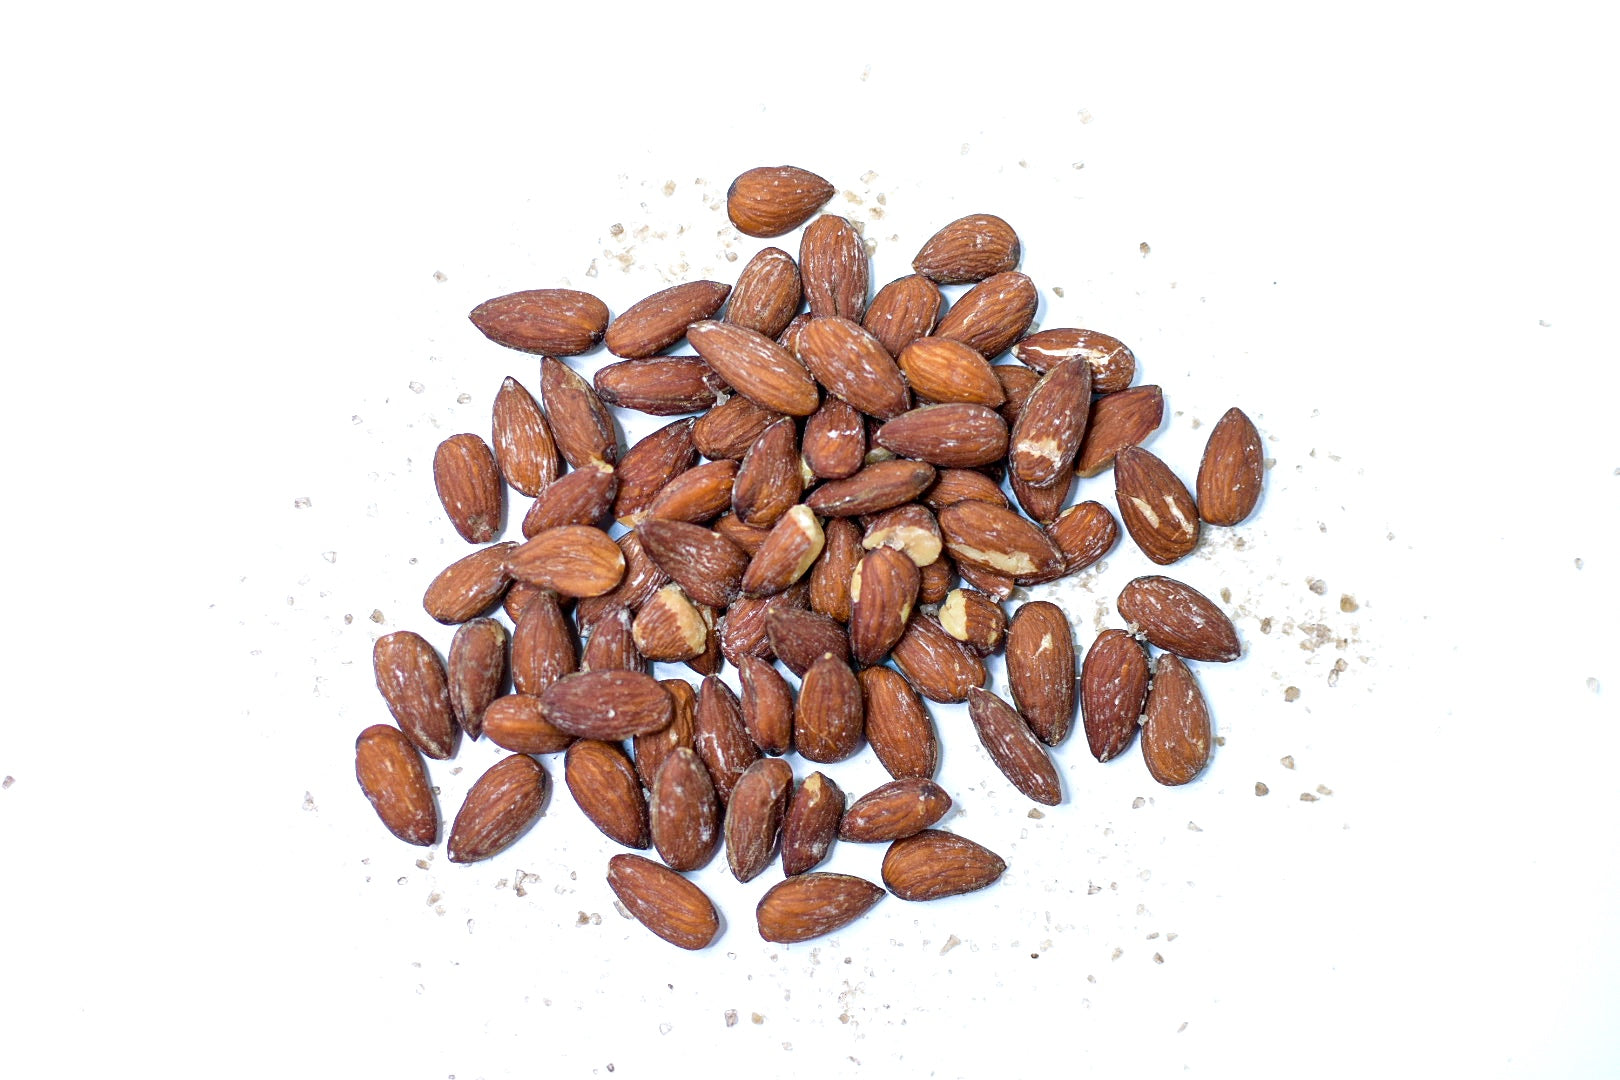 All-Natural Duck Fat Roasted Almonds